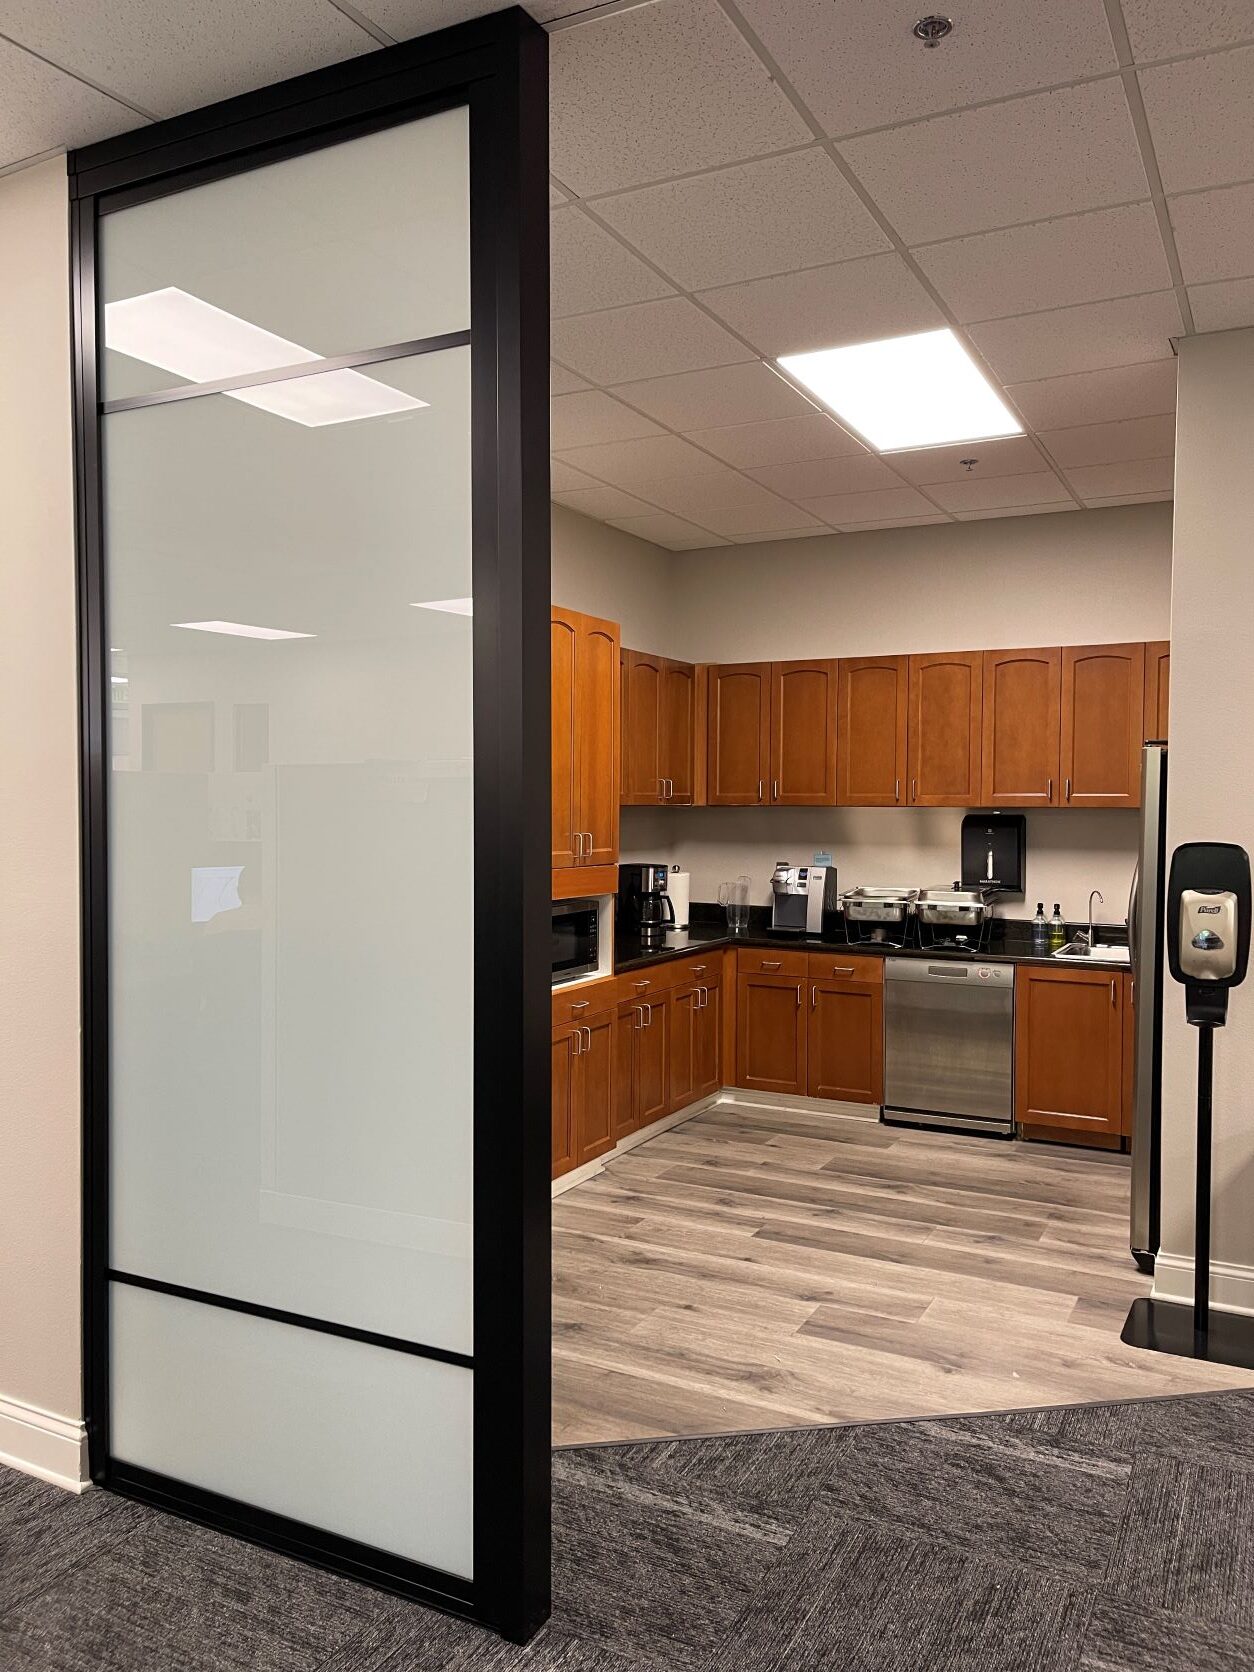 A modern office kitchen viewed through a glass door with a hand sanitizer dispenser by the entrance, featuring a fix panel.